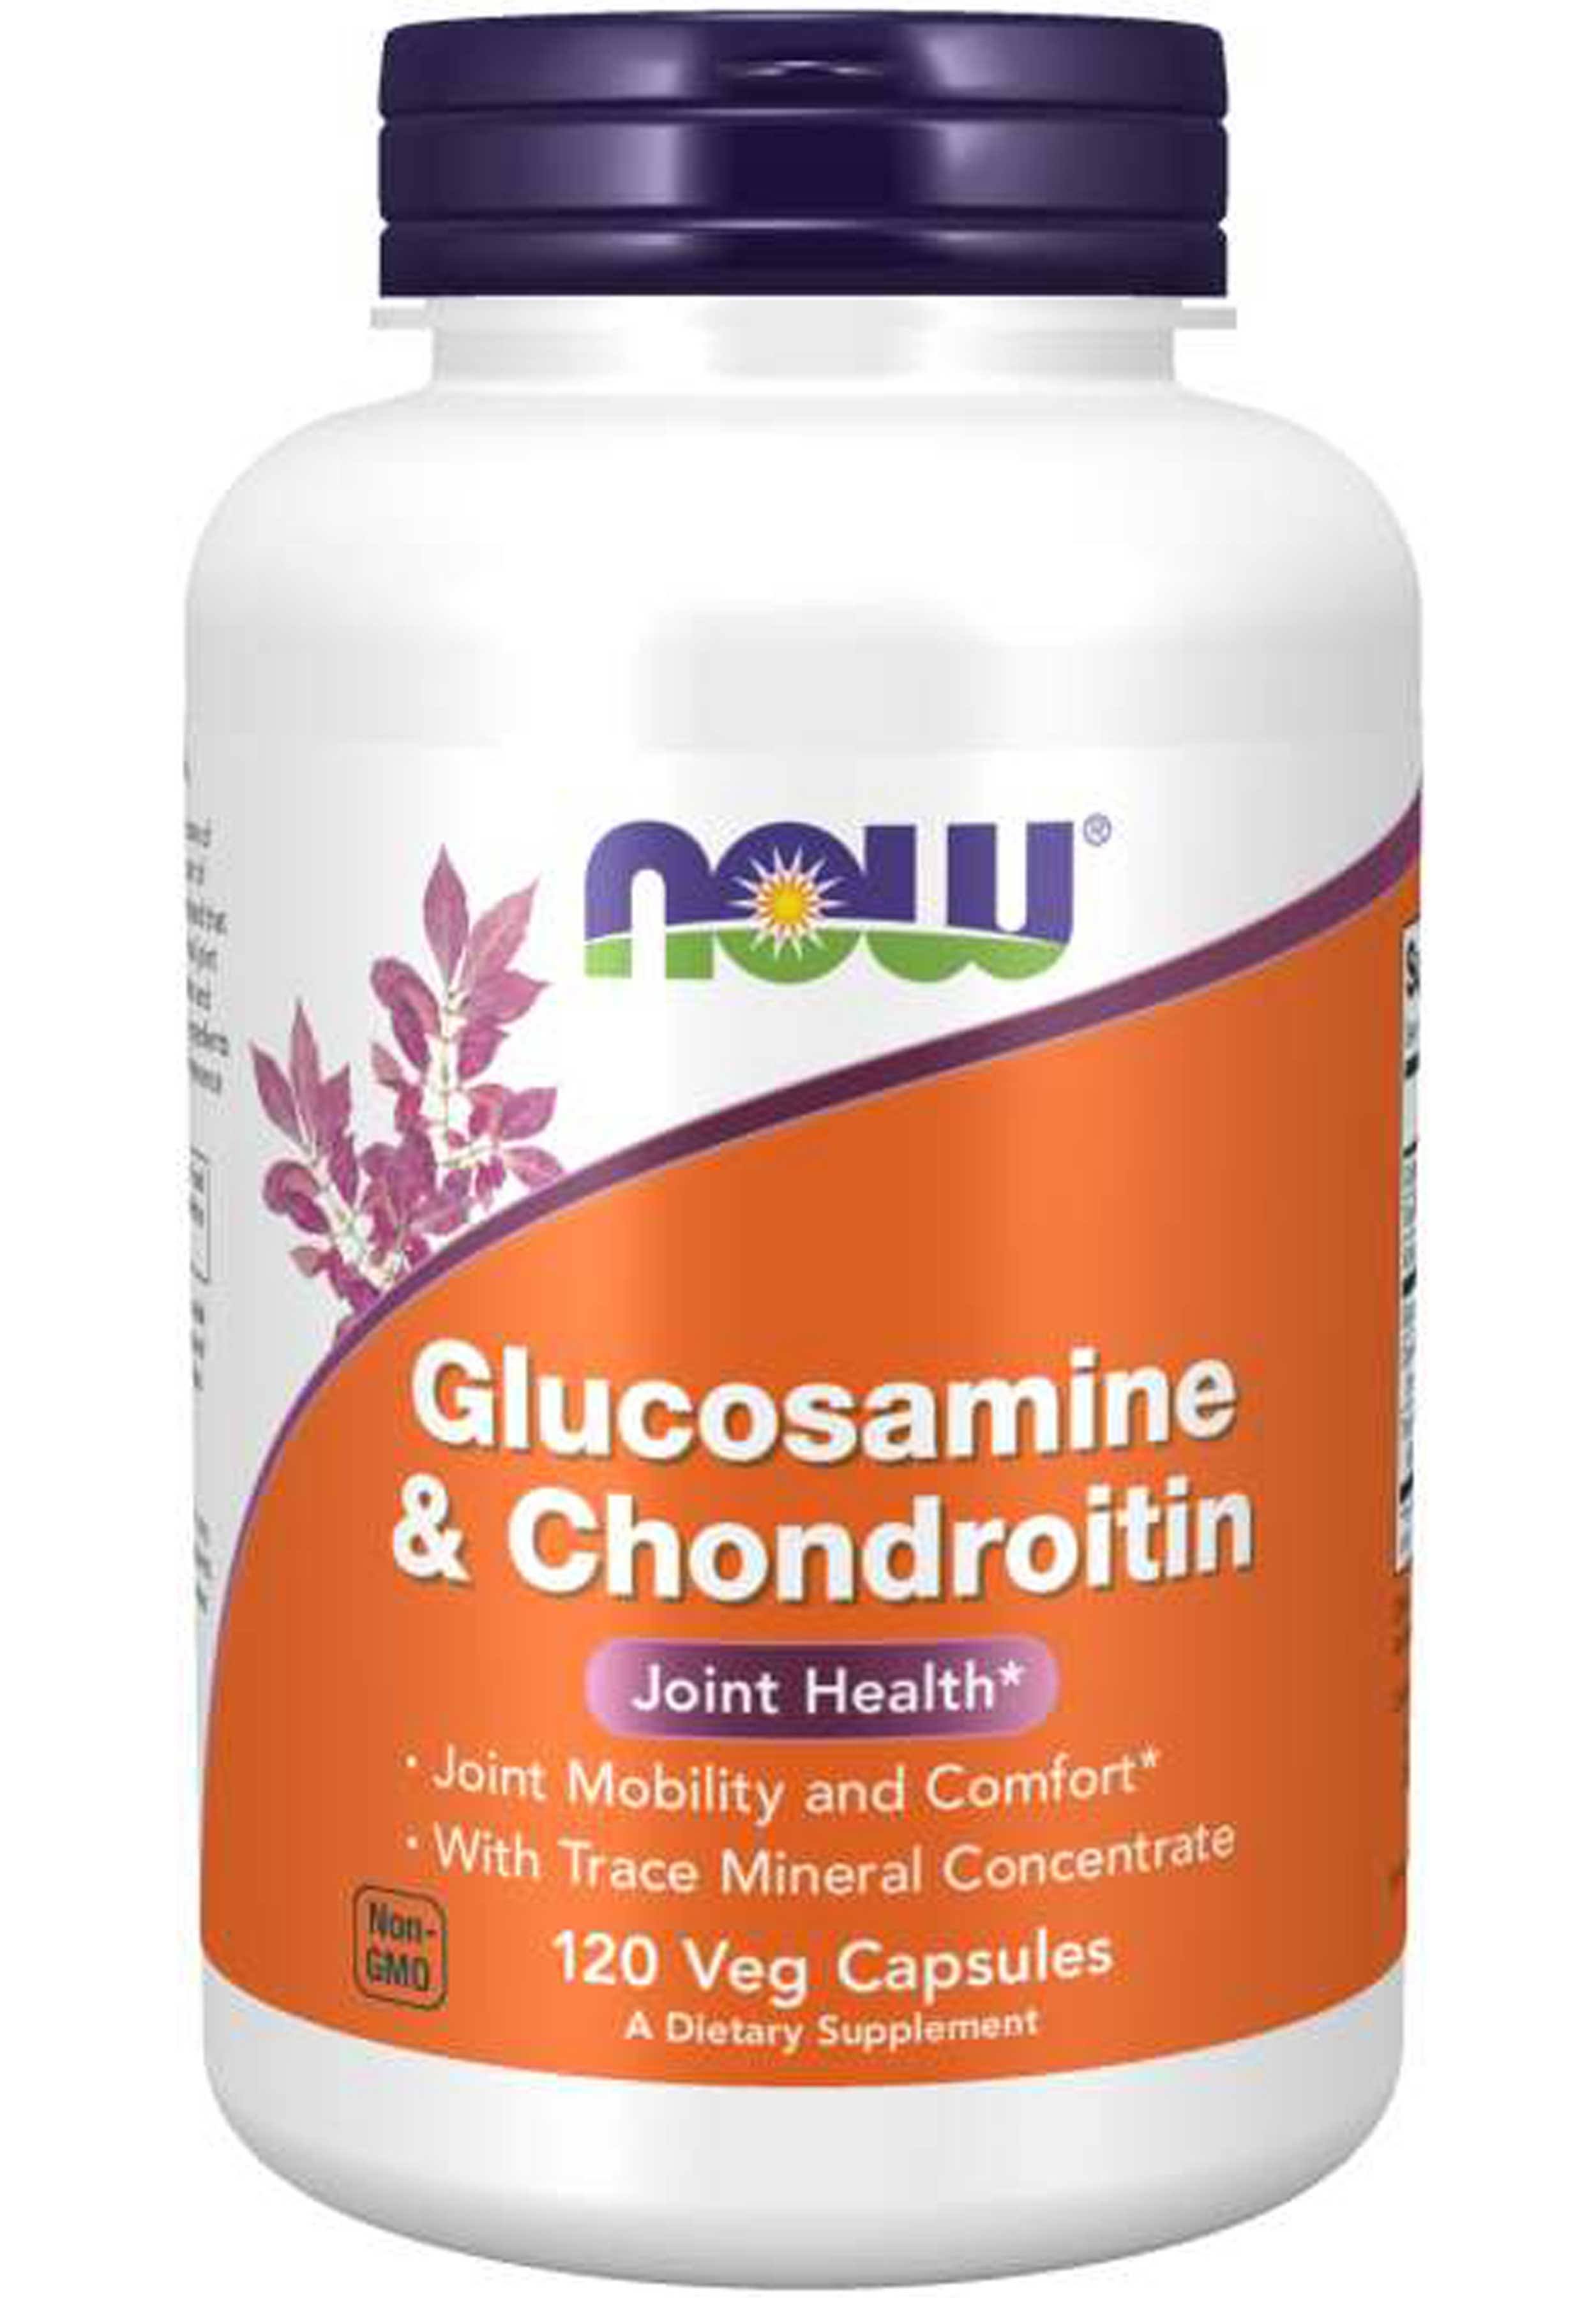 Now Foods Glucosamine and Chondroitin - 120 Capsules